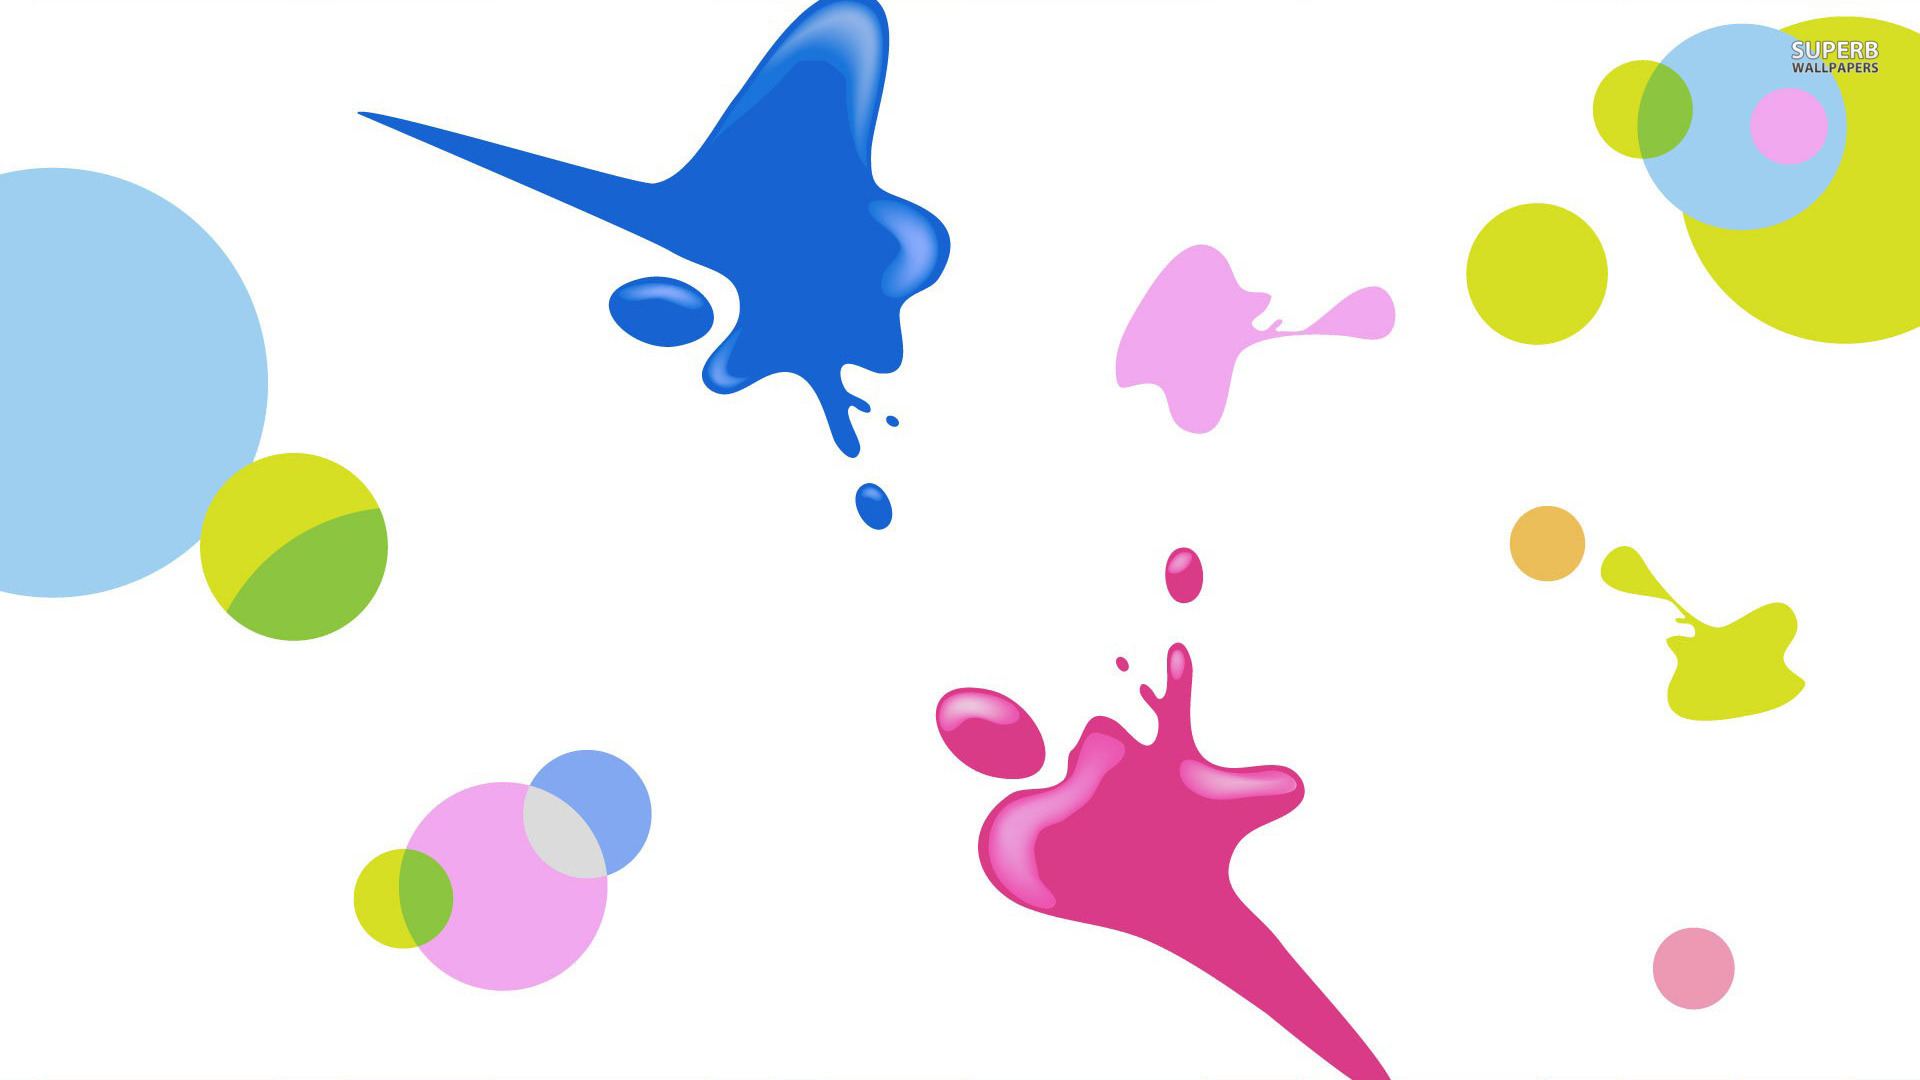 Colorful paint splashes and circles wallpaper - Vector wallpapers ...